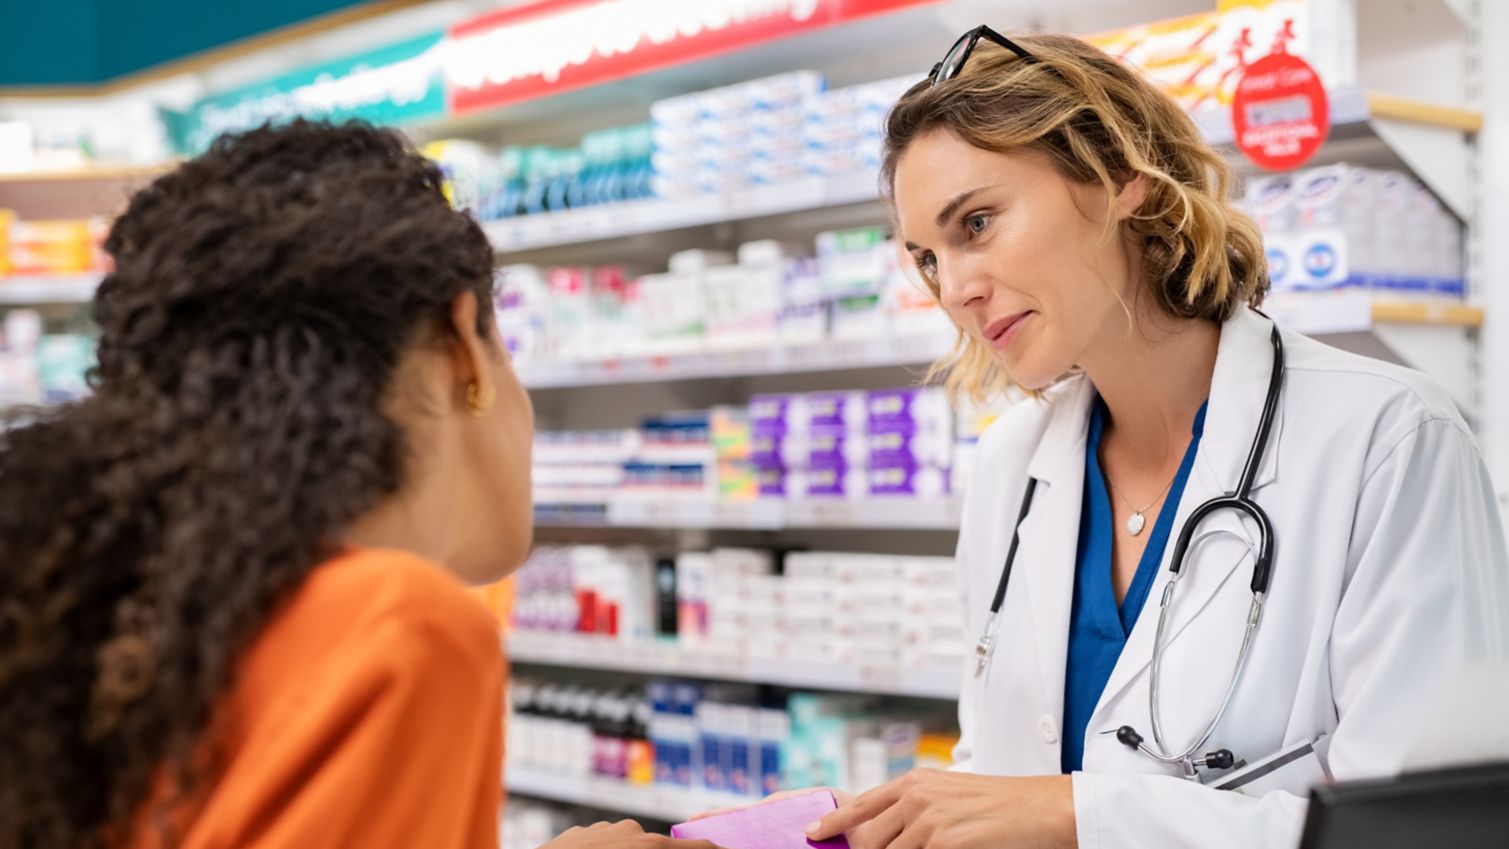 Medicaid member discusses medicine with pharmacist